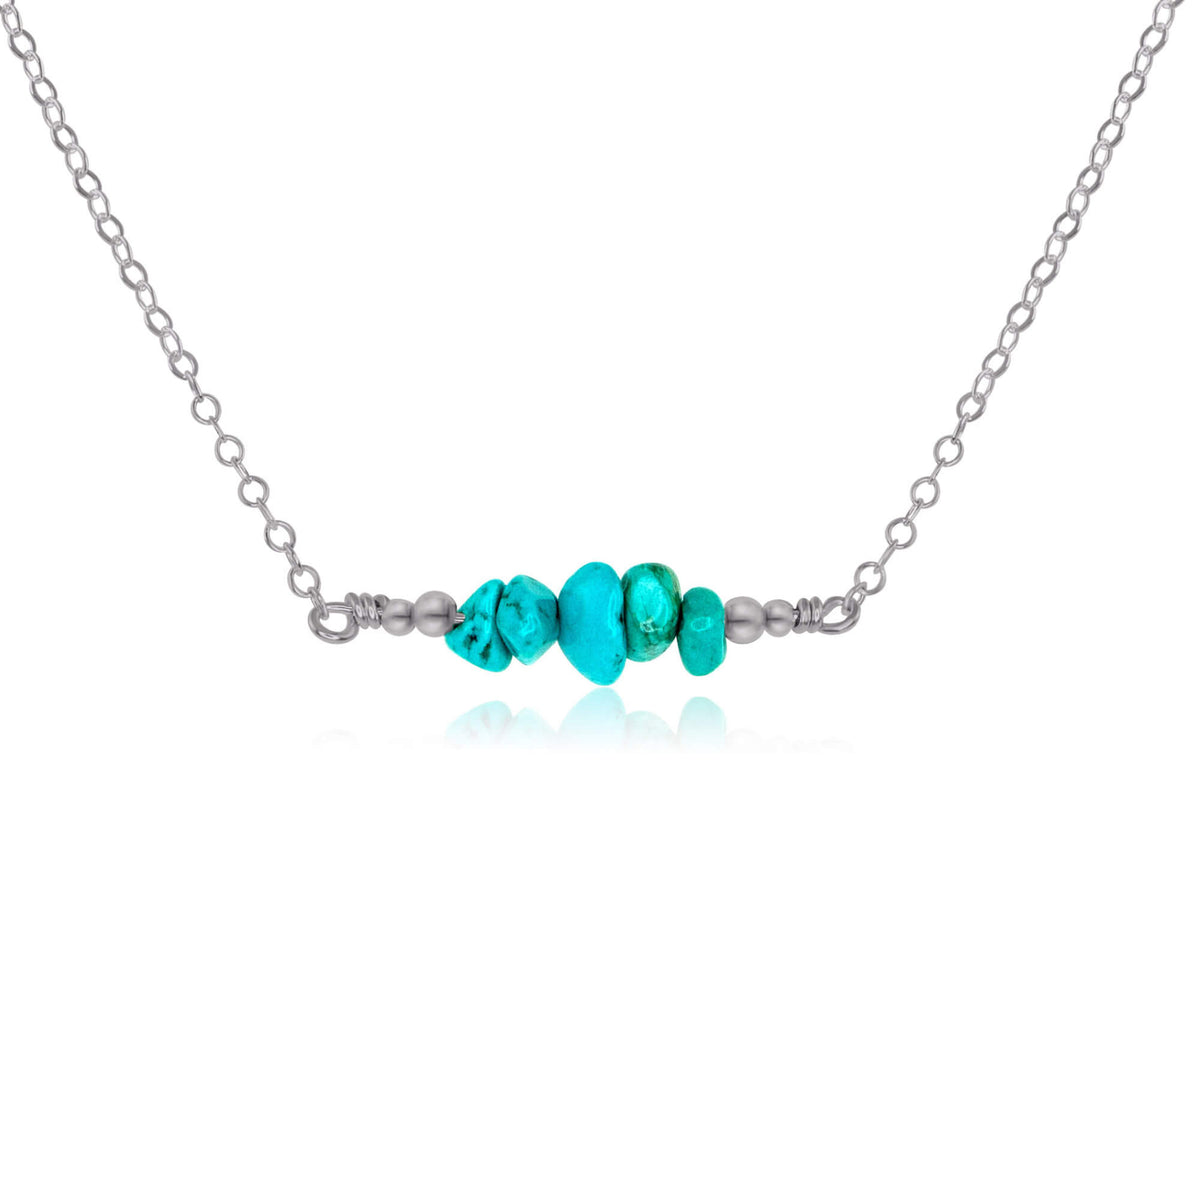 Chip Bead Bar Necklace - Turquoise - Stainless Steel - Luna Tide Handmade Jewellery